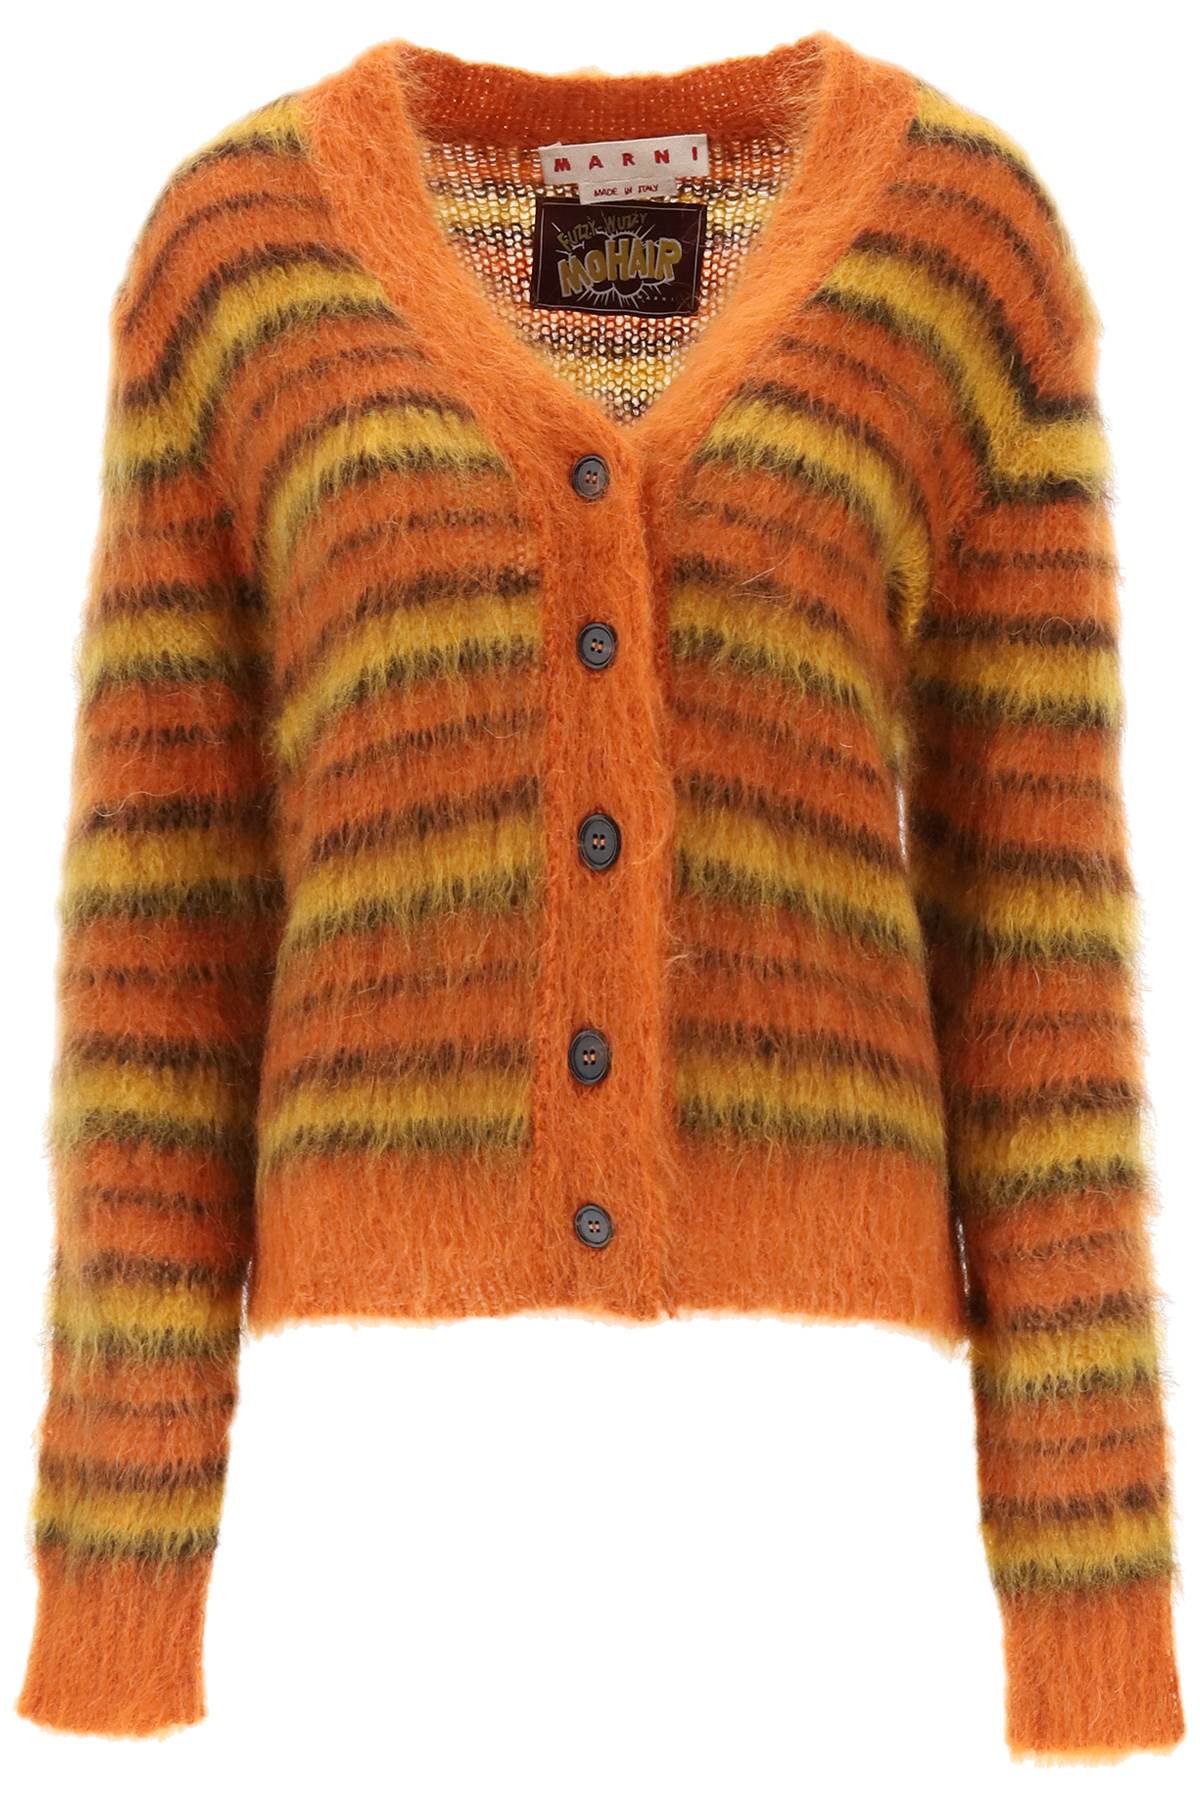 Marni cardigan in striped brushed mohair-0